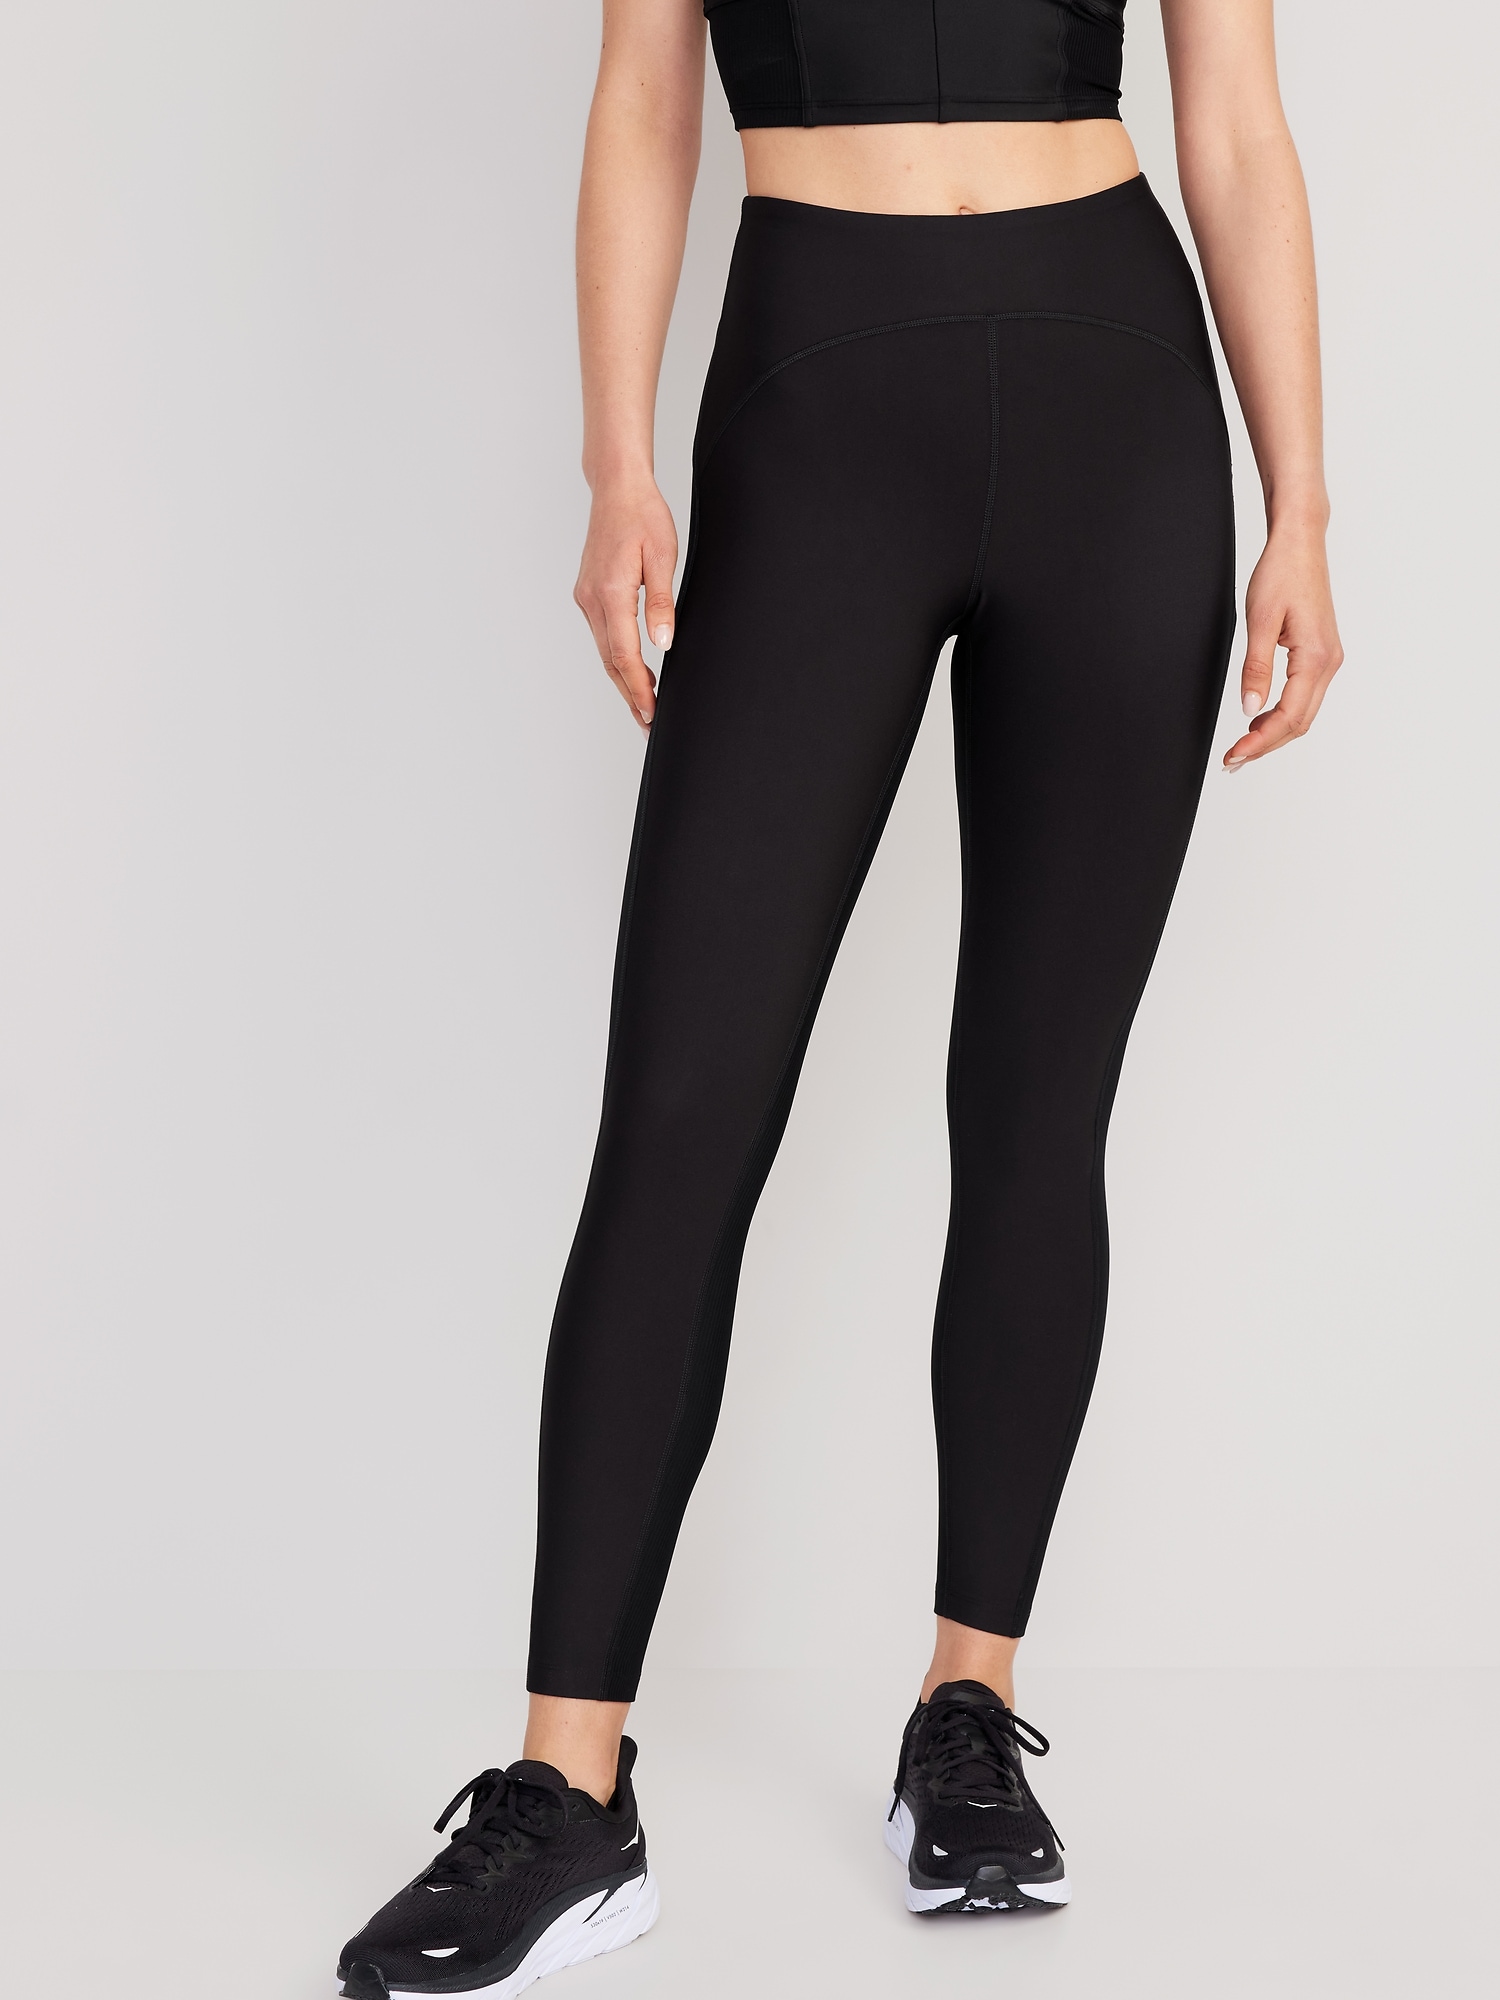 Old Navy - High-Waisted PowerSoft 7/8 Mixed-Fabric Leggings for